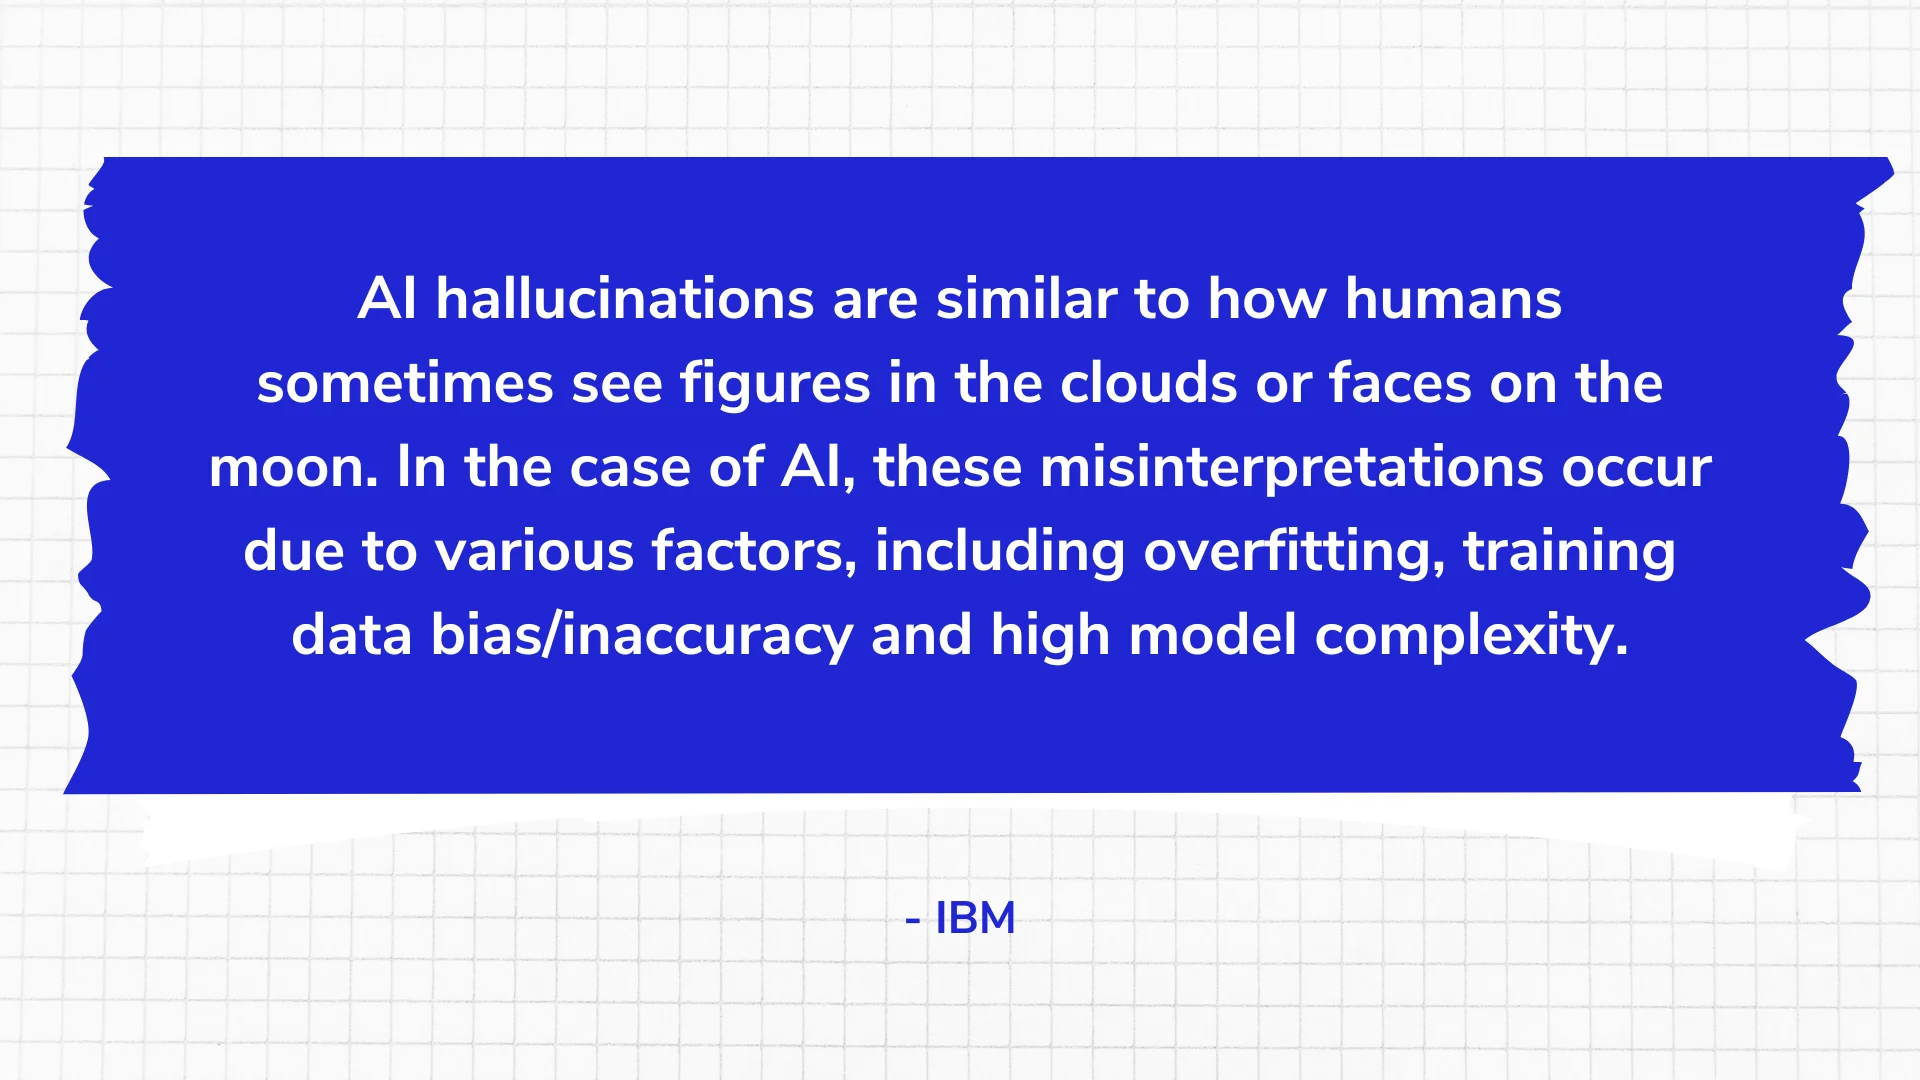 AI hallucinations are similar to how humans sometimes see figures in the clouds or faces on the moon.